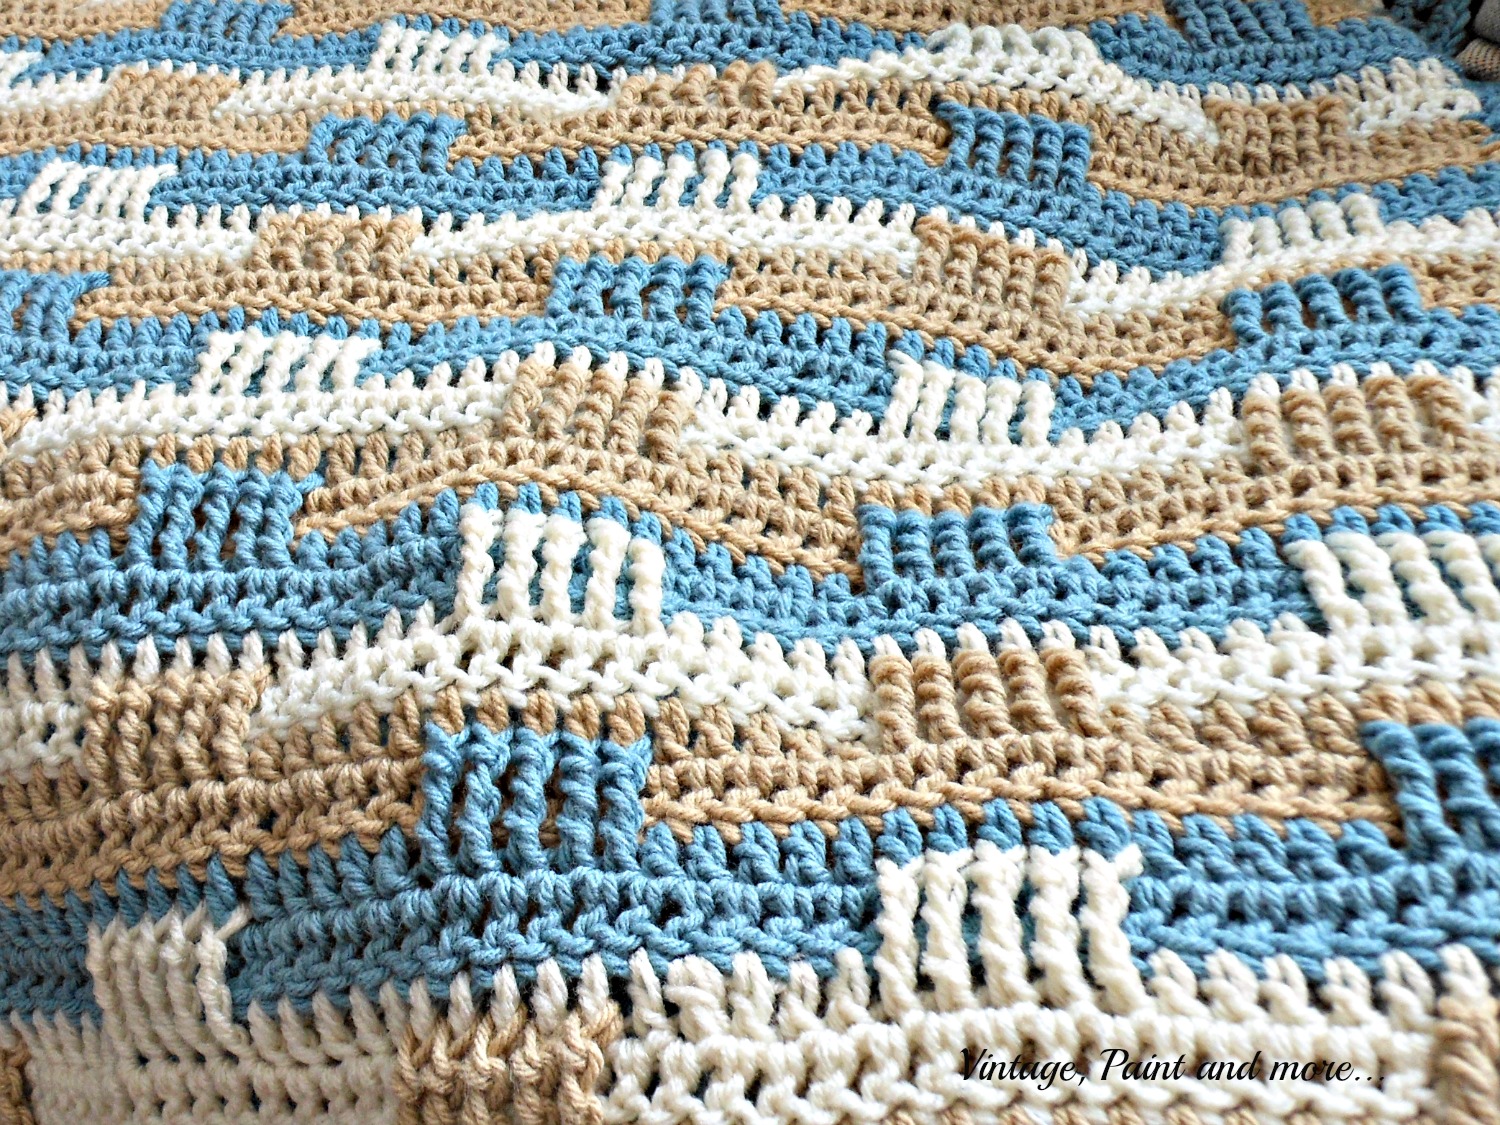 Crochet Afghan and Stenciled Pillow | Vintage, Paint and more...